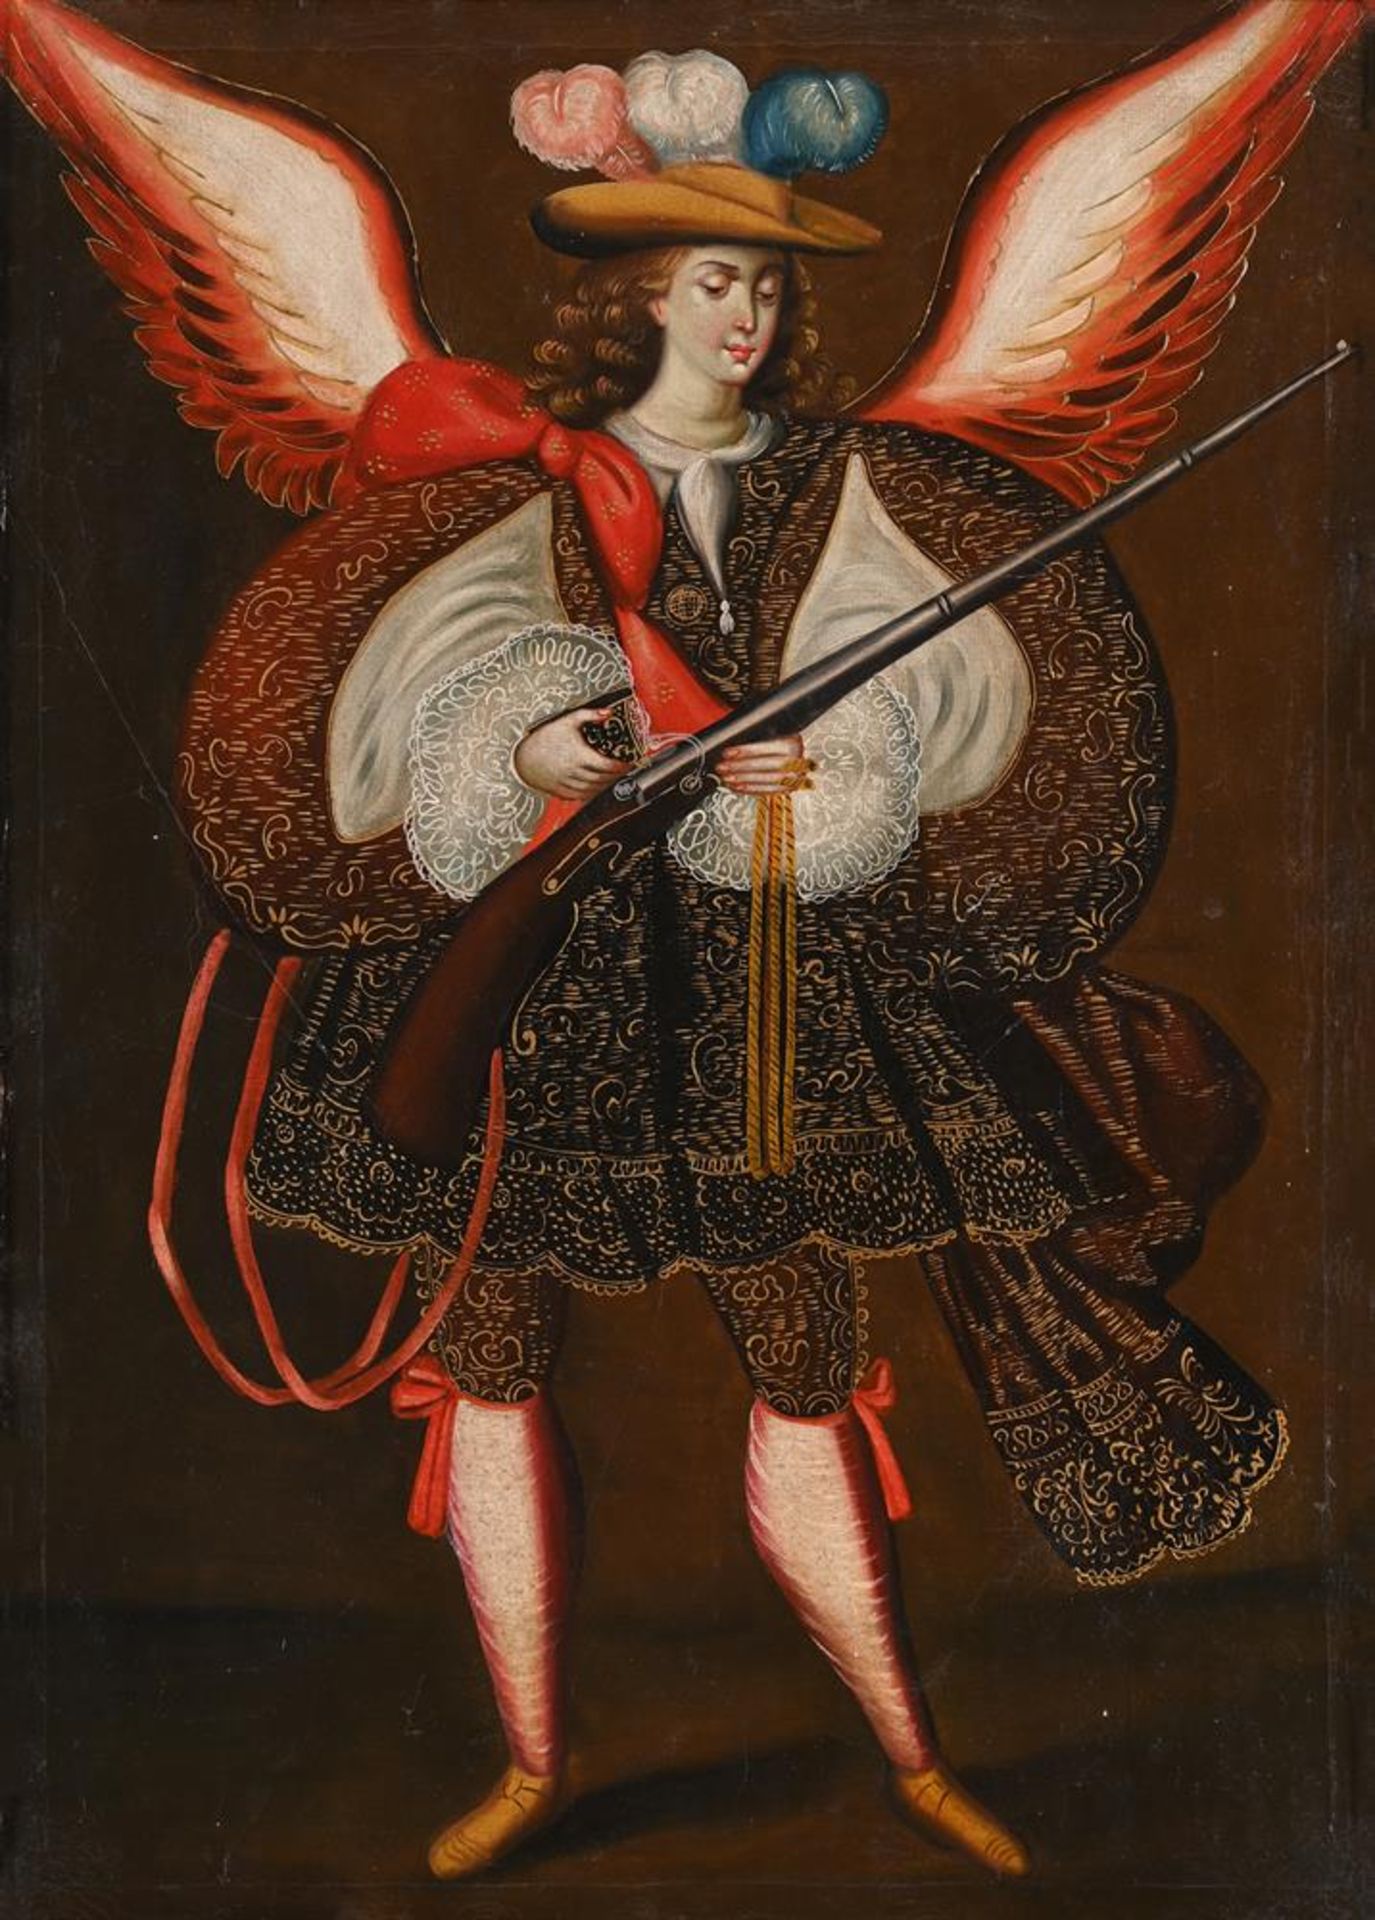 MANNER OF THE MASTER OF CALAMARCA, ANGEL WITH HARQUEBUS